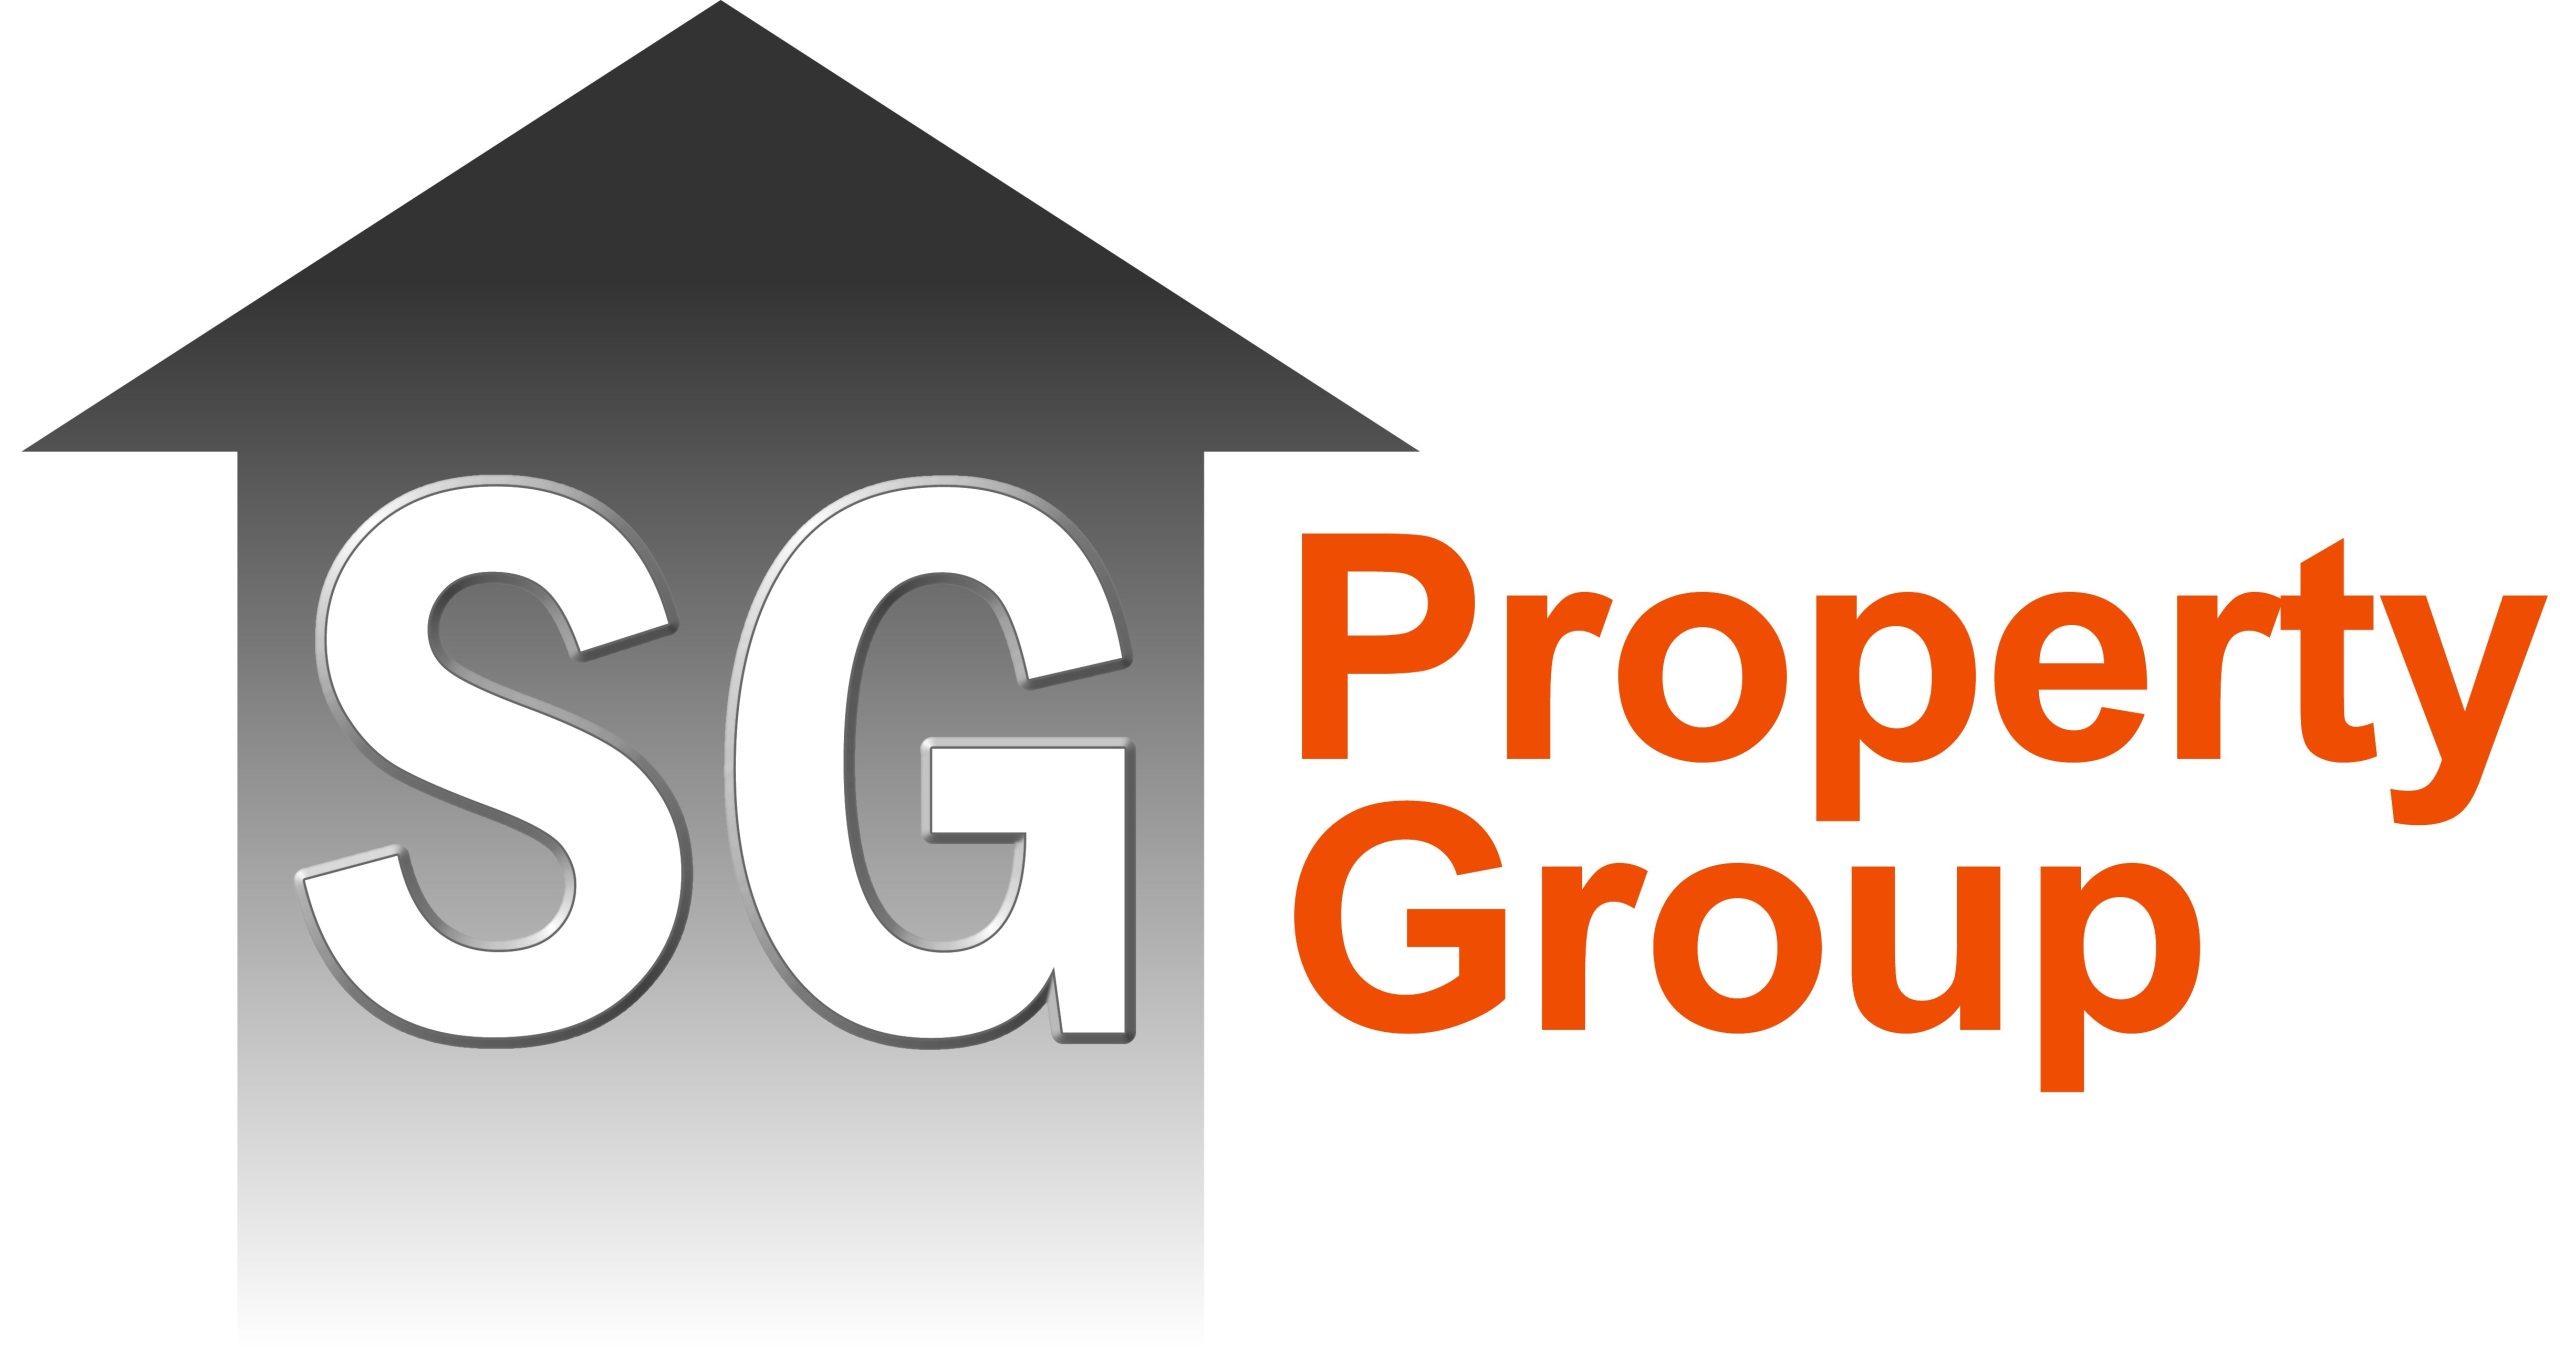 SG Property Group - UK Accommodation Provider for Self Catering Rooms, Apartments and Properties